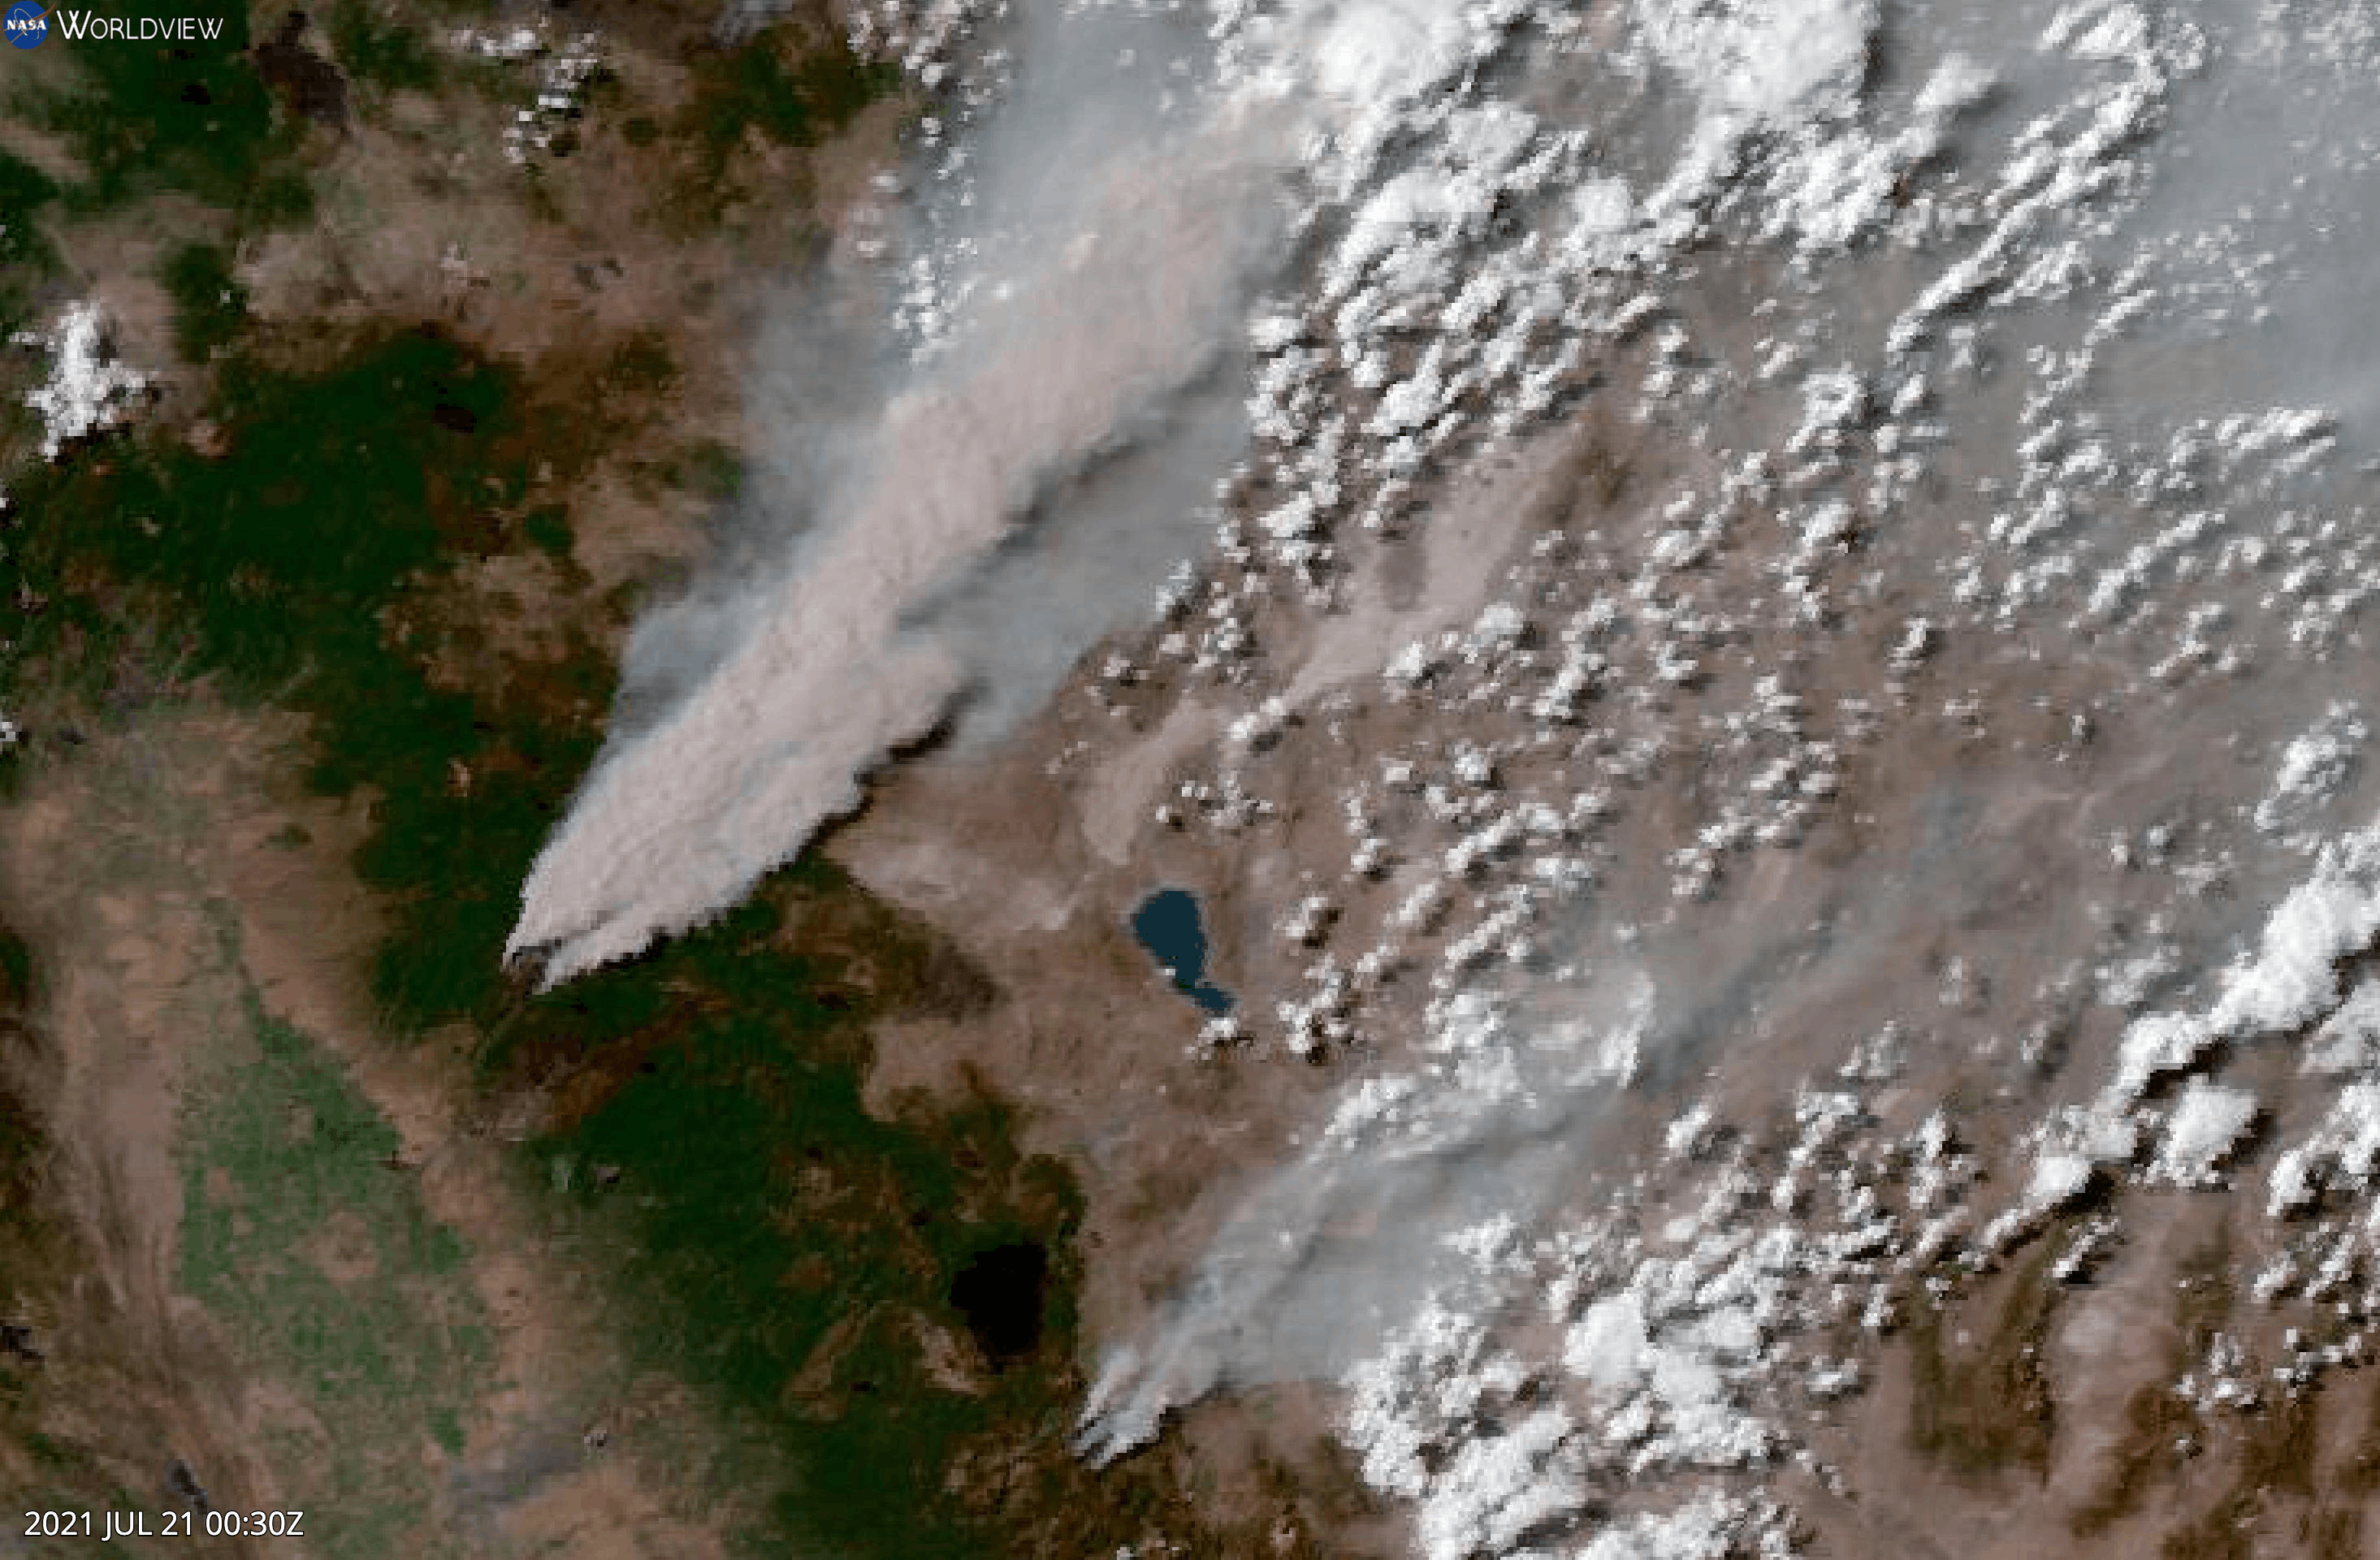 New satellite missions backed by NASA, Google, SpaceX, the California Department of Forestry and Fire Protection and other groups were announced this week and promise to advance early wildfire detection and help reduce fire damage by monitoring Earth from above.